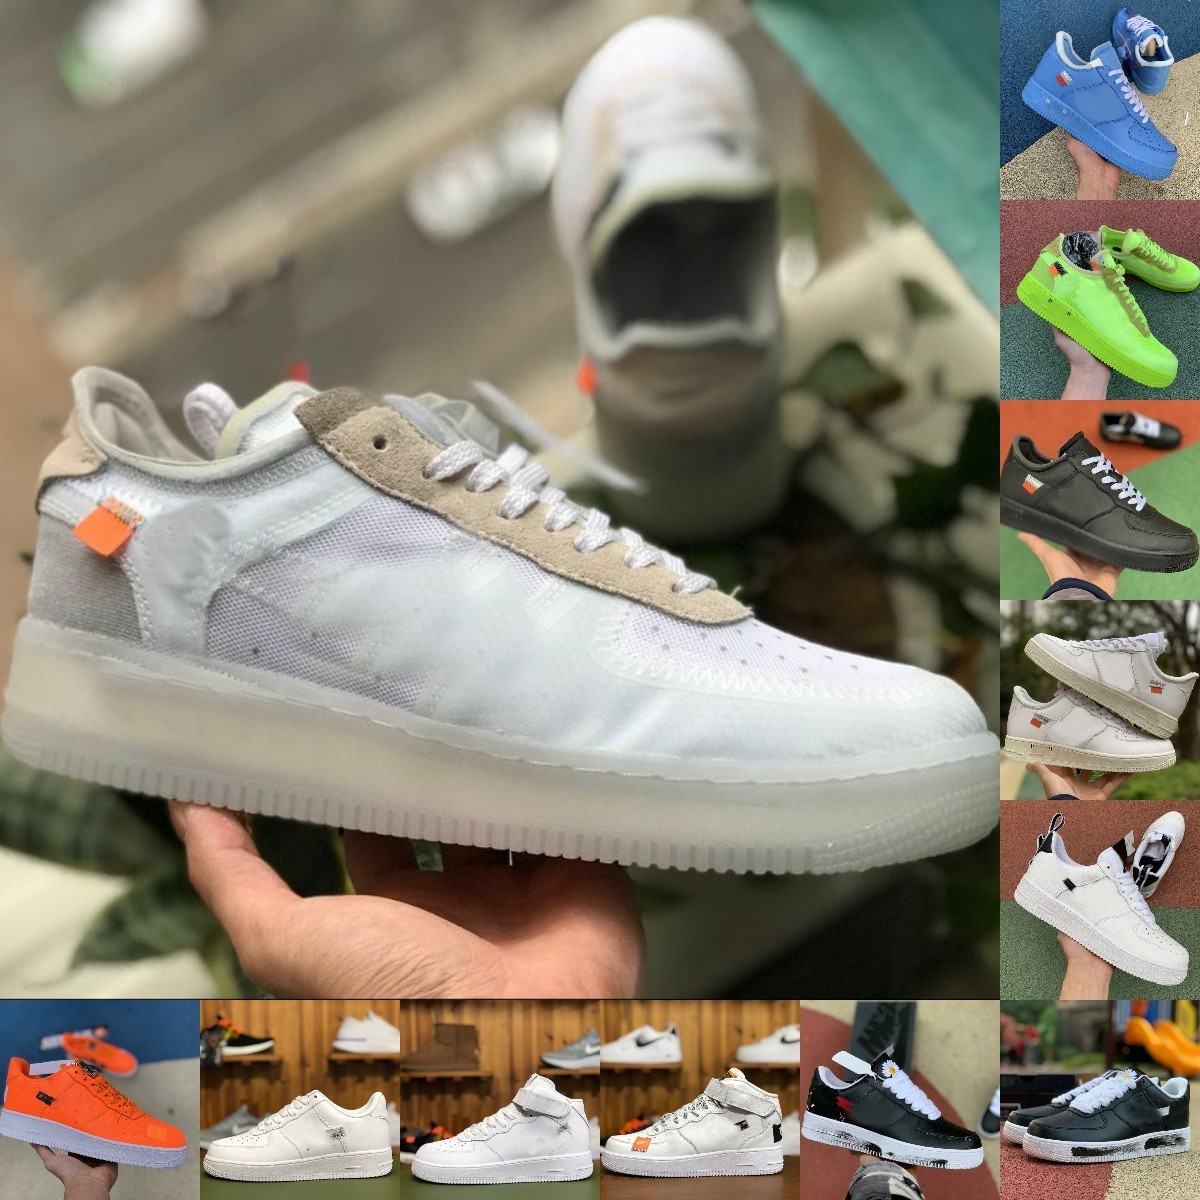 

High Quality Mens Sports Shoes OG Classic Triple White Low Shadow Just Utility FOrCes Black Wheat Pistachio Sail Airs Pale Ivory Women Trainer Designer Sneakers S04, Please contact us